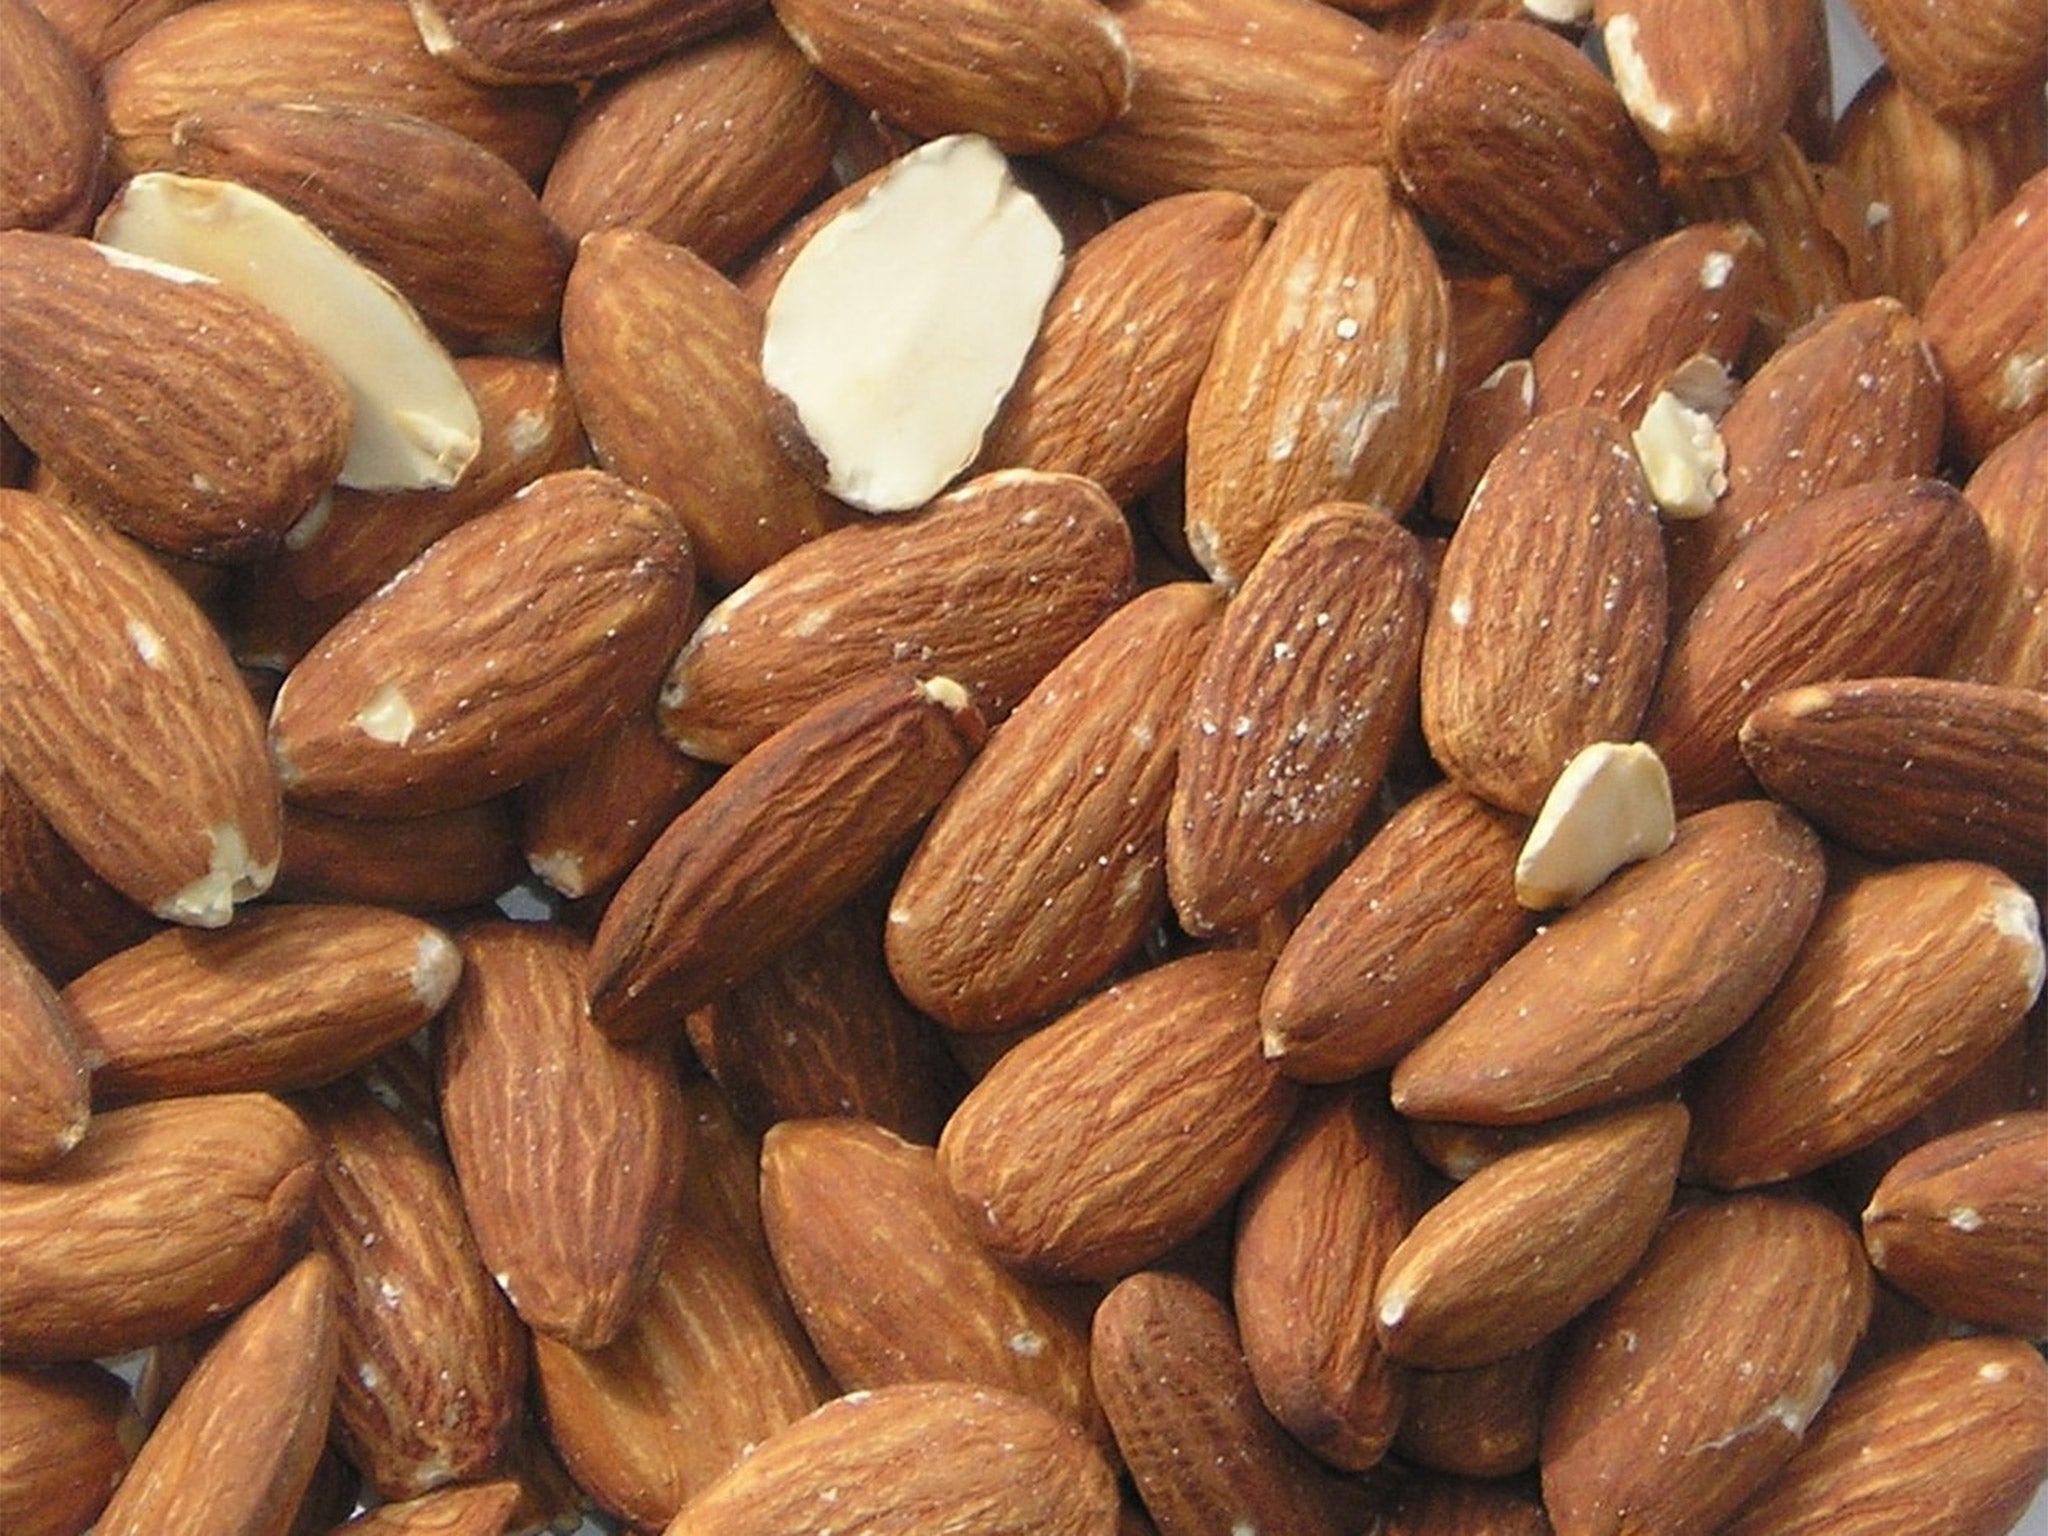 Food watchdogs in Scandinavia have recalled about three dozen products containing almonds, pictured, in place of paprika